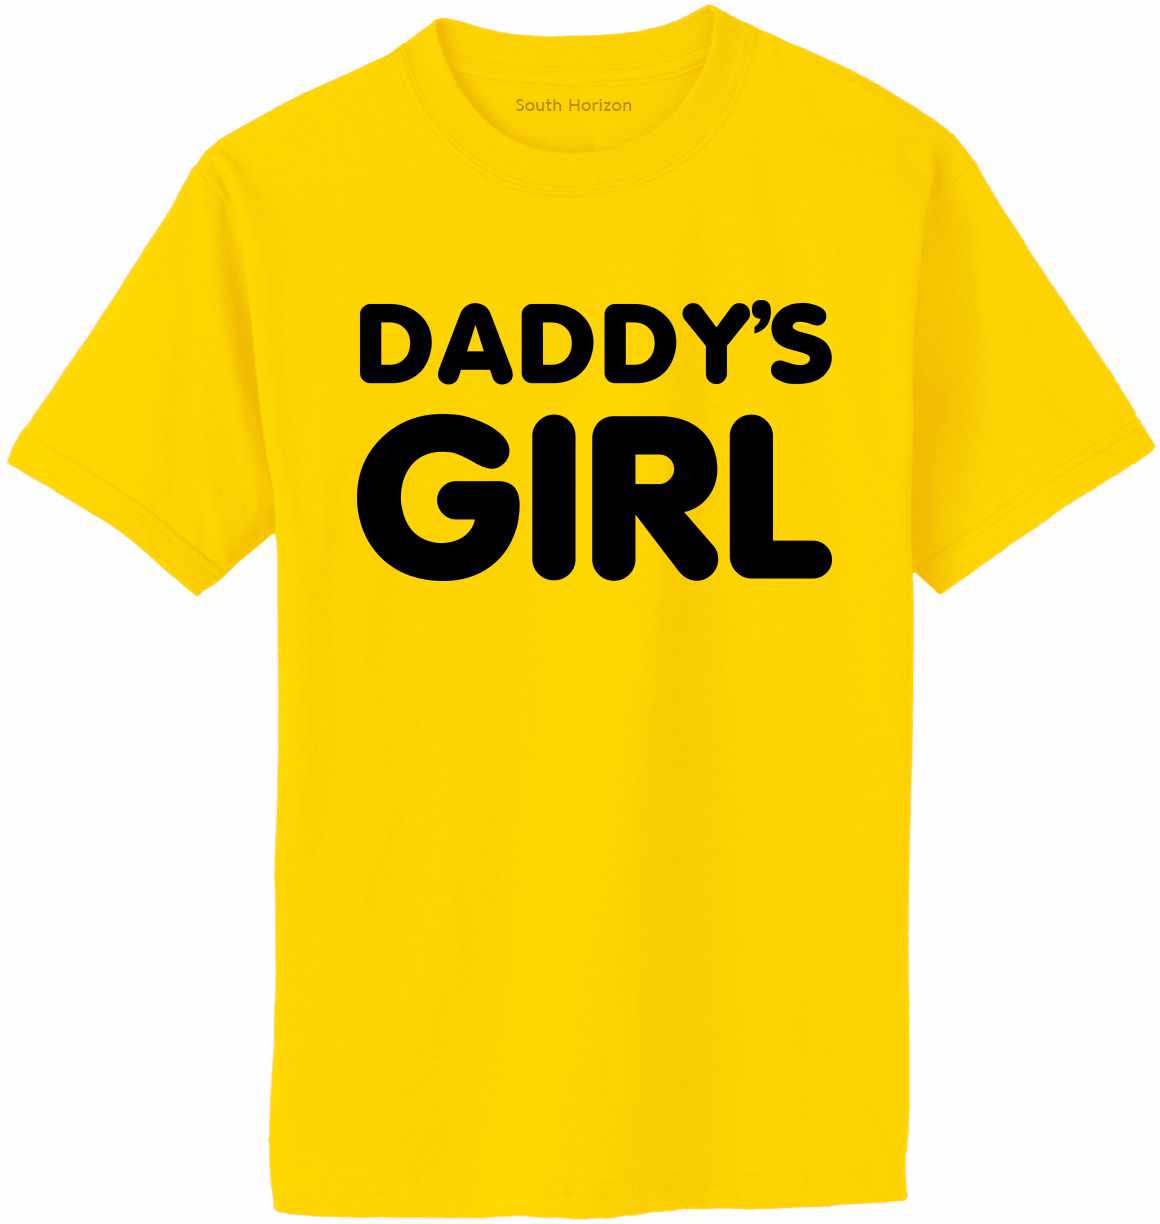 Daddy's Girl on Adult T-Shirt